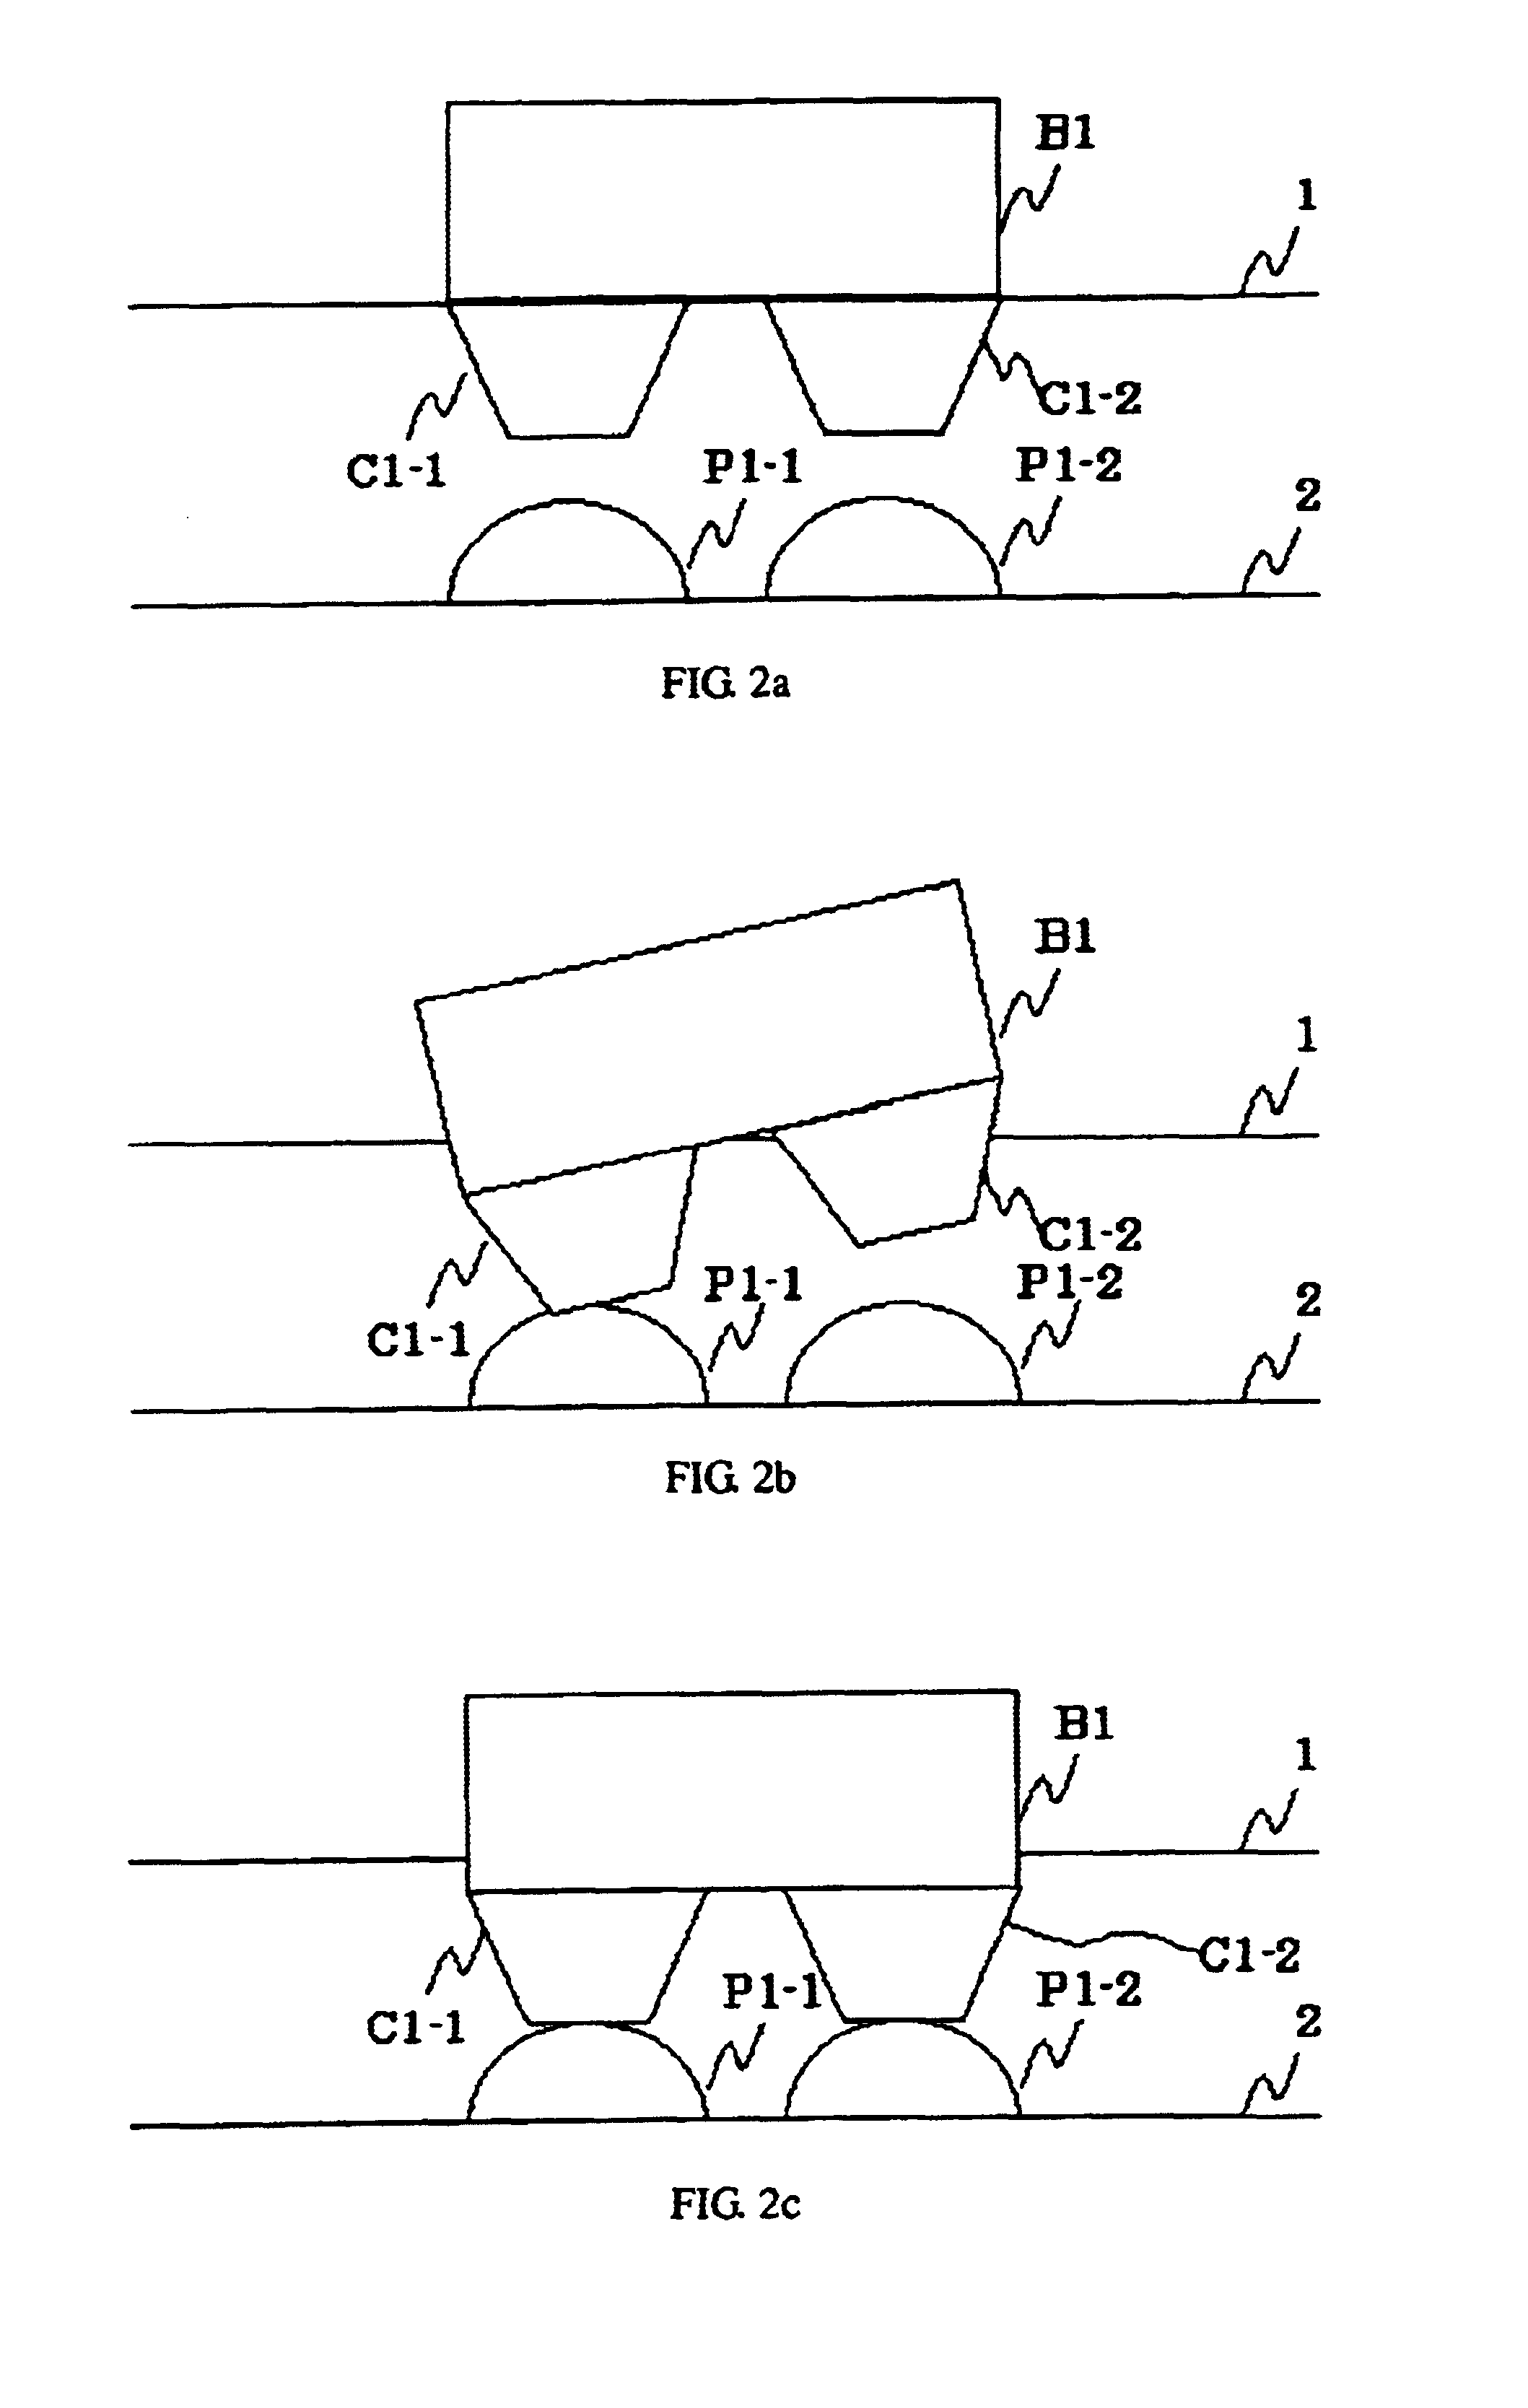 Keypad apparatus and method for inputting data and characters for a computing device or cellular phone